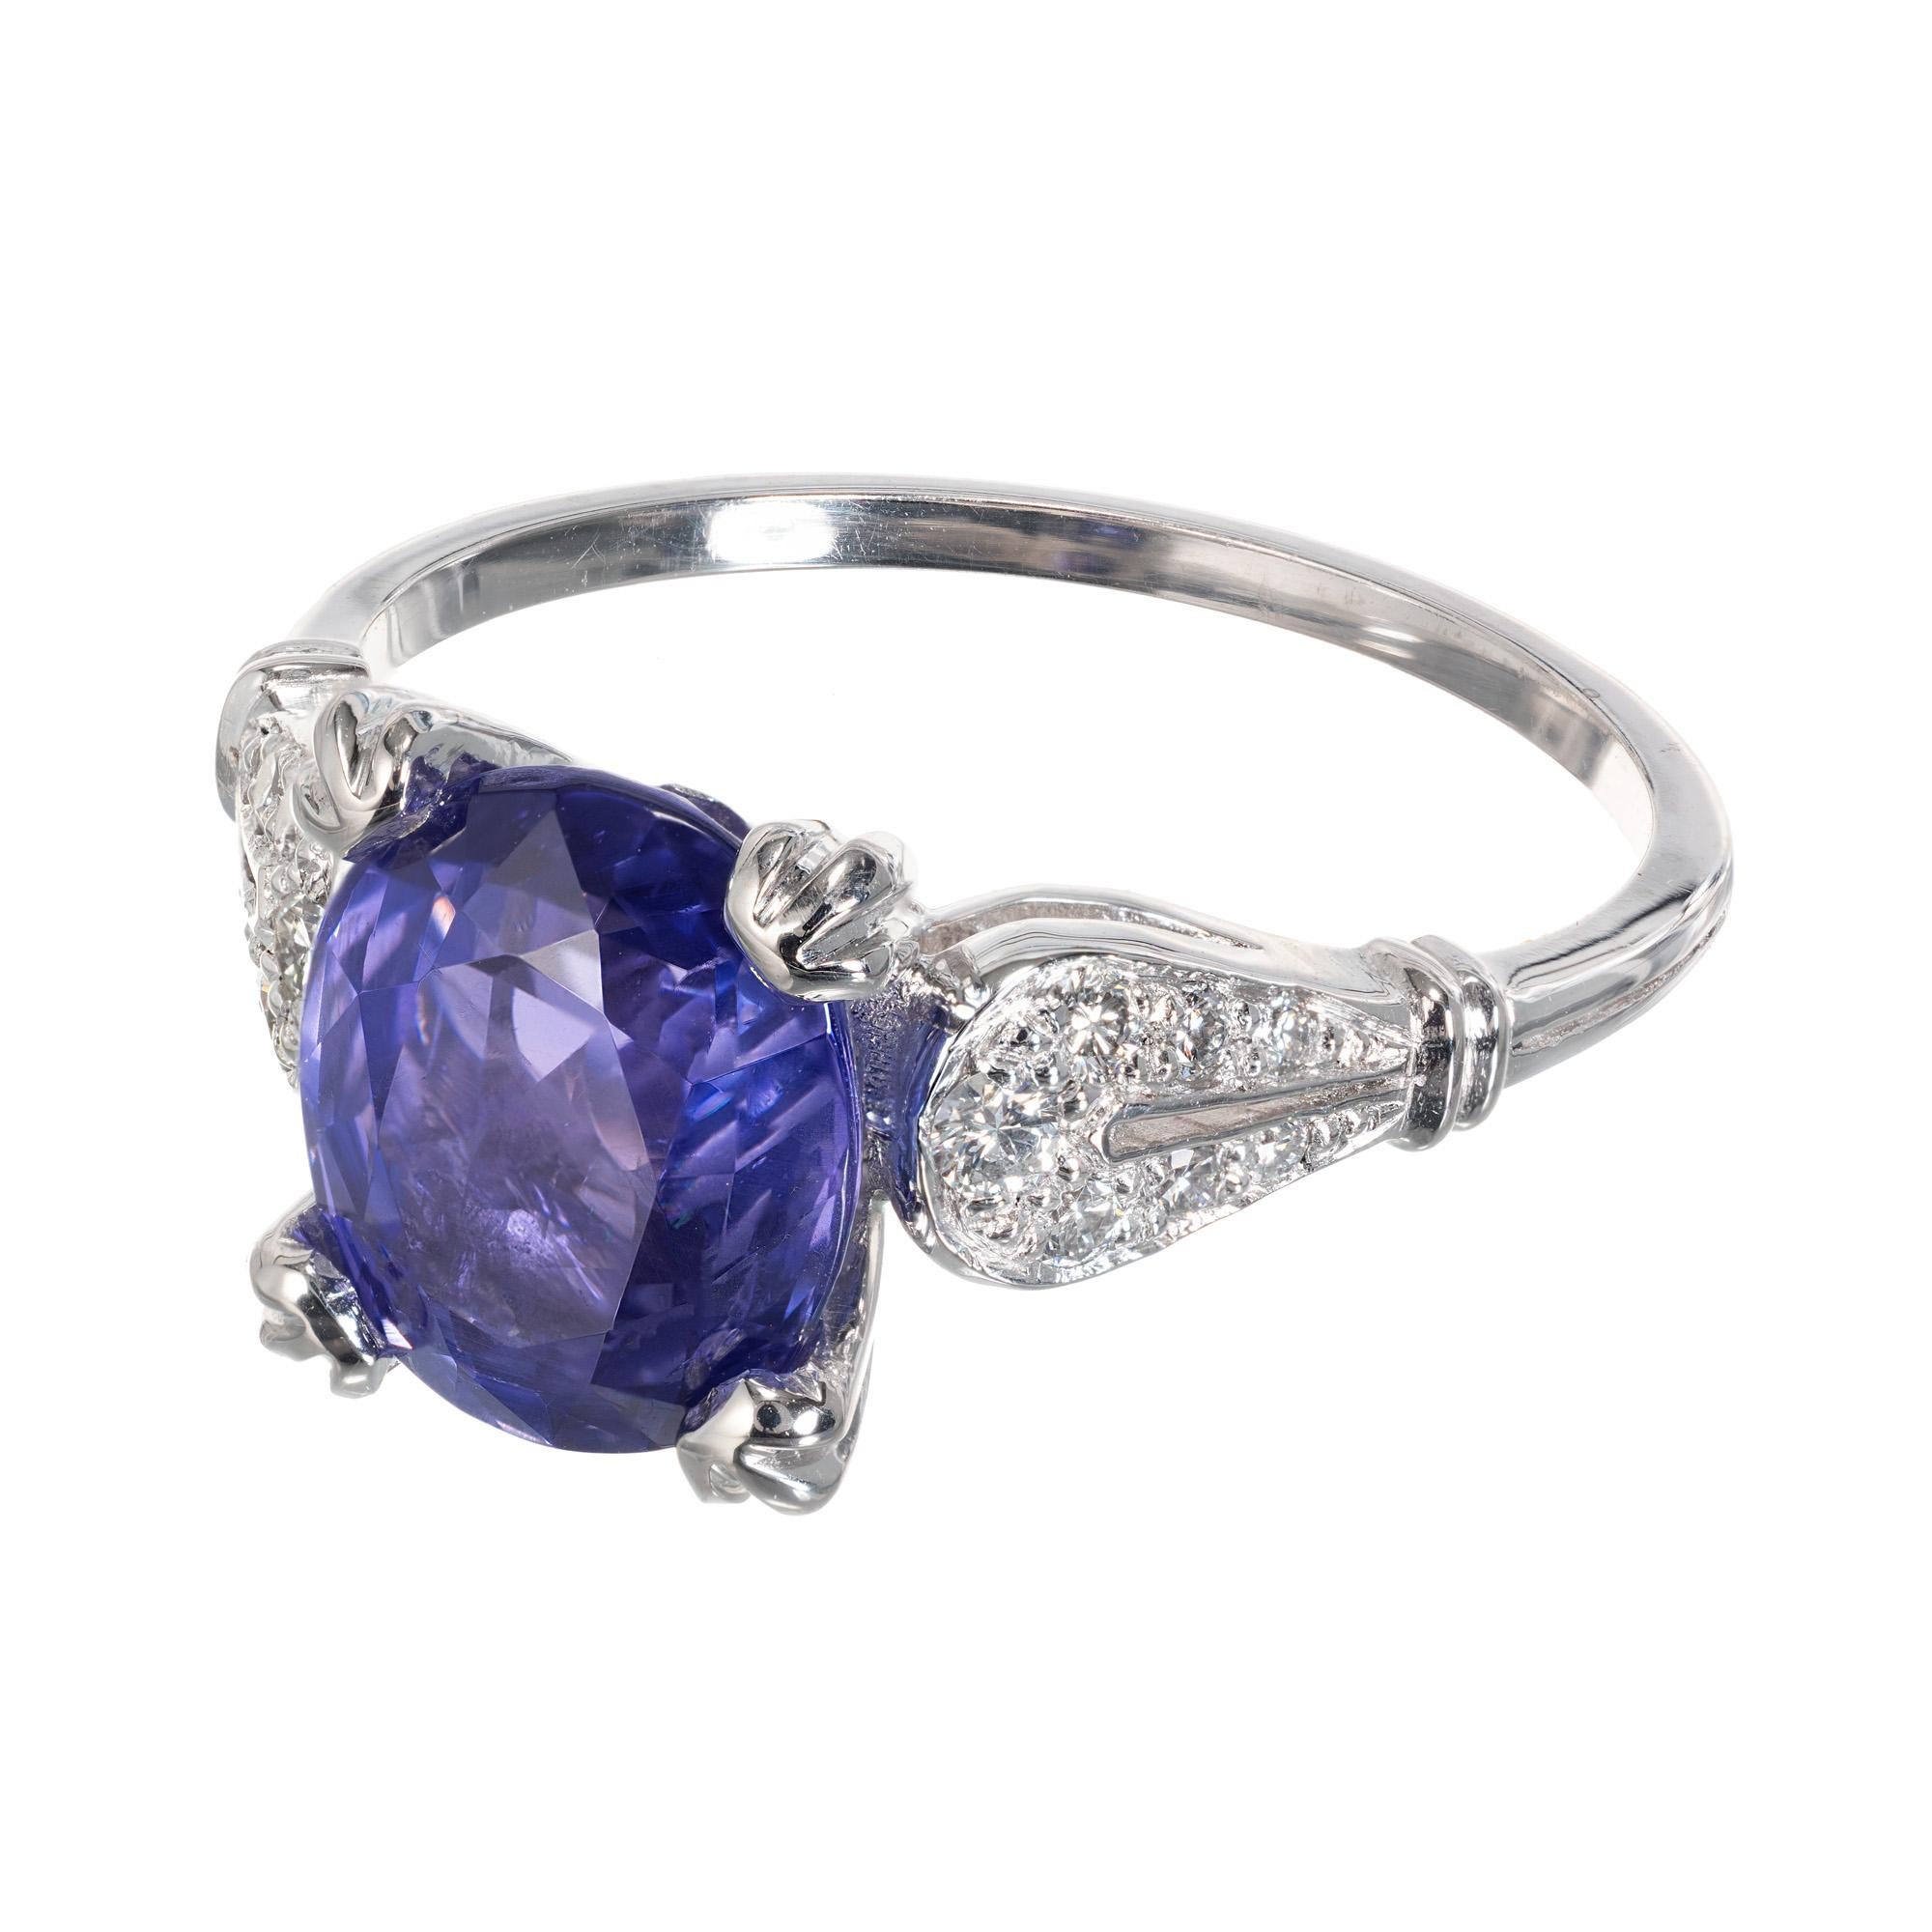 Oval Cut Peter Suchy GIA Certified 3.22 Carat Violet Sapphire Diamond Engagement Ring For Sale